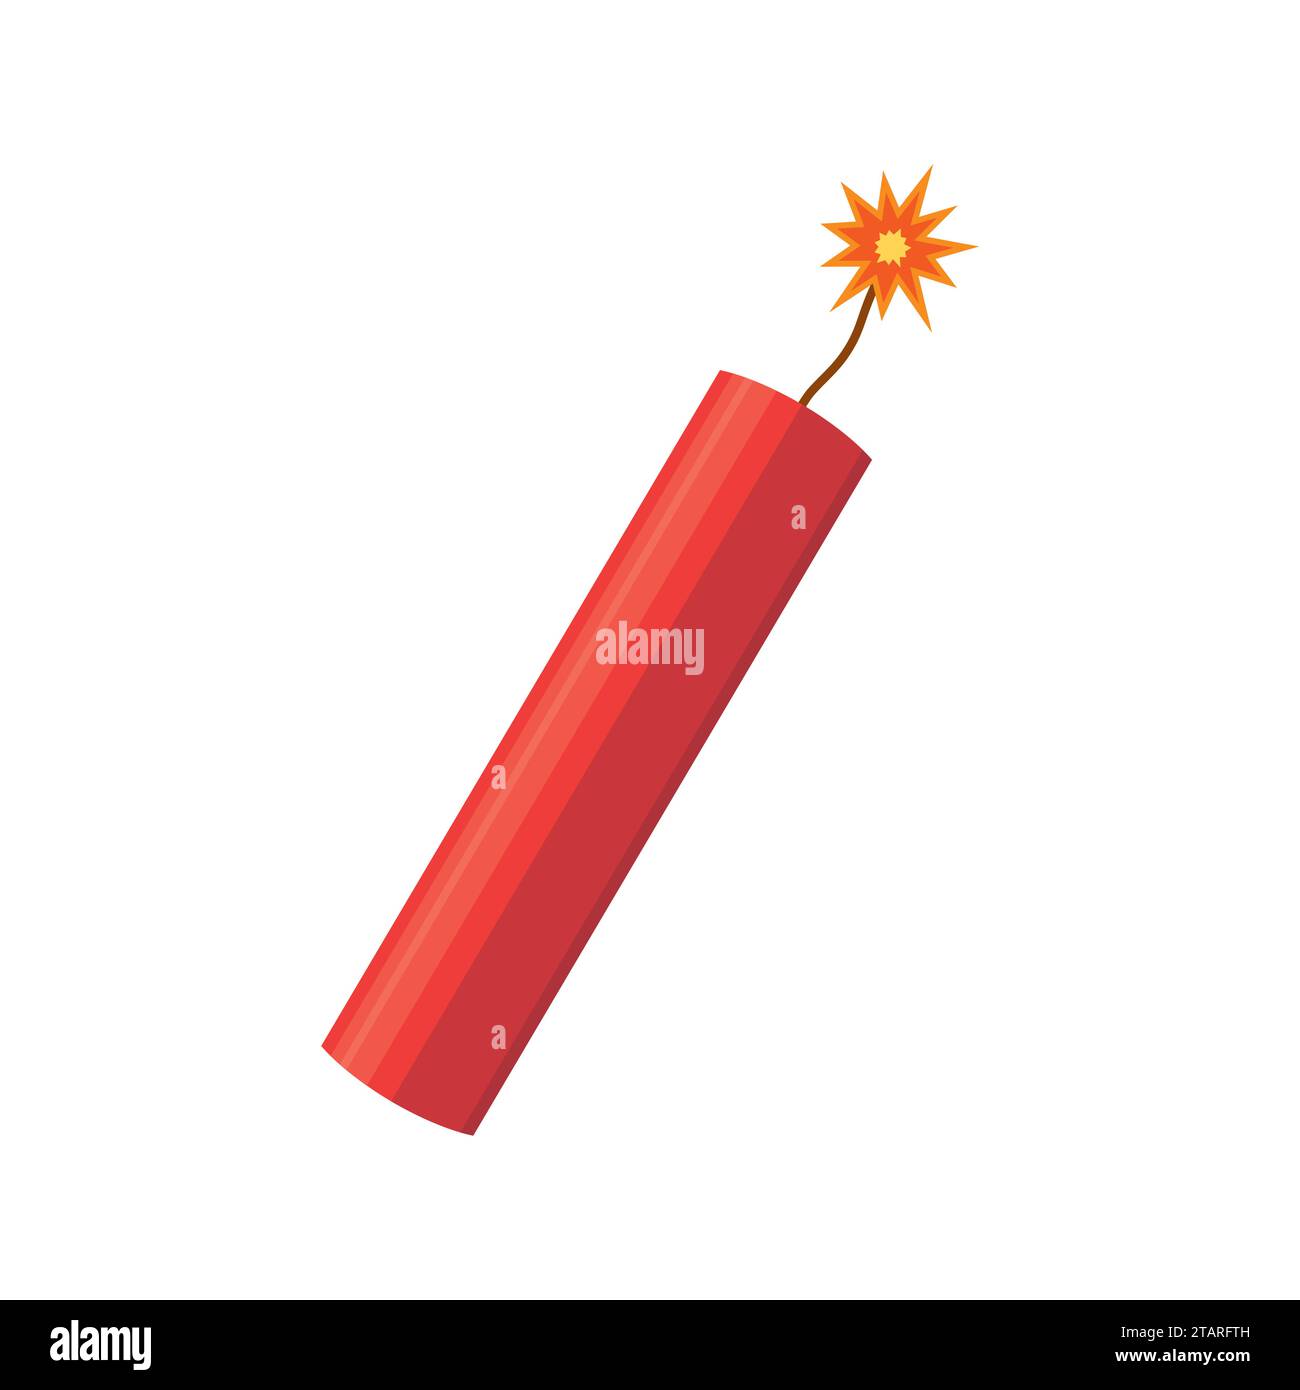 Dynamite bomb explosion with burning wick detonate isolated on white background. Vector dynamite bomb with sparkle danger explosive weapon Stock Vector